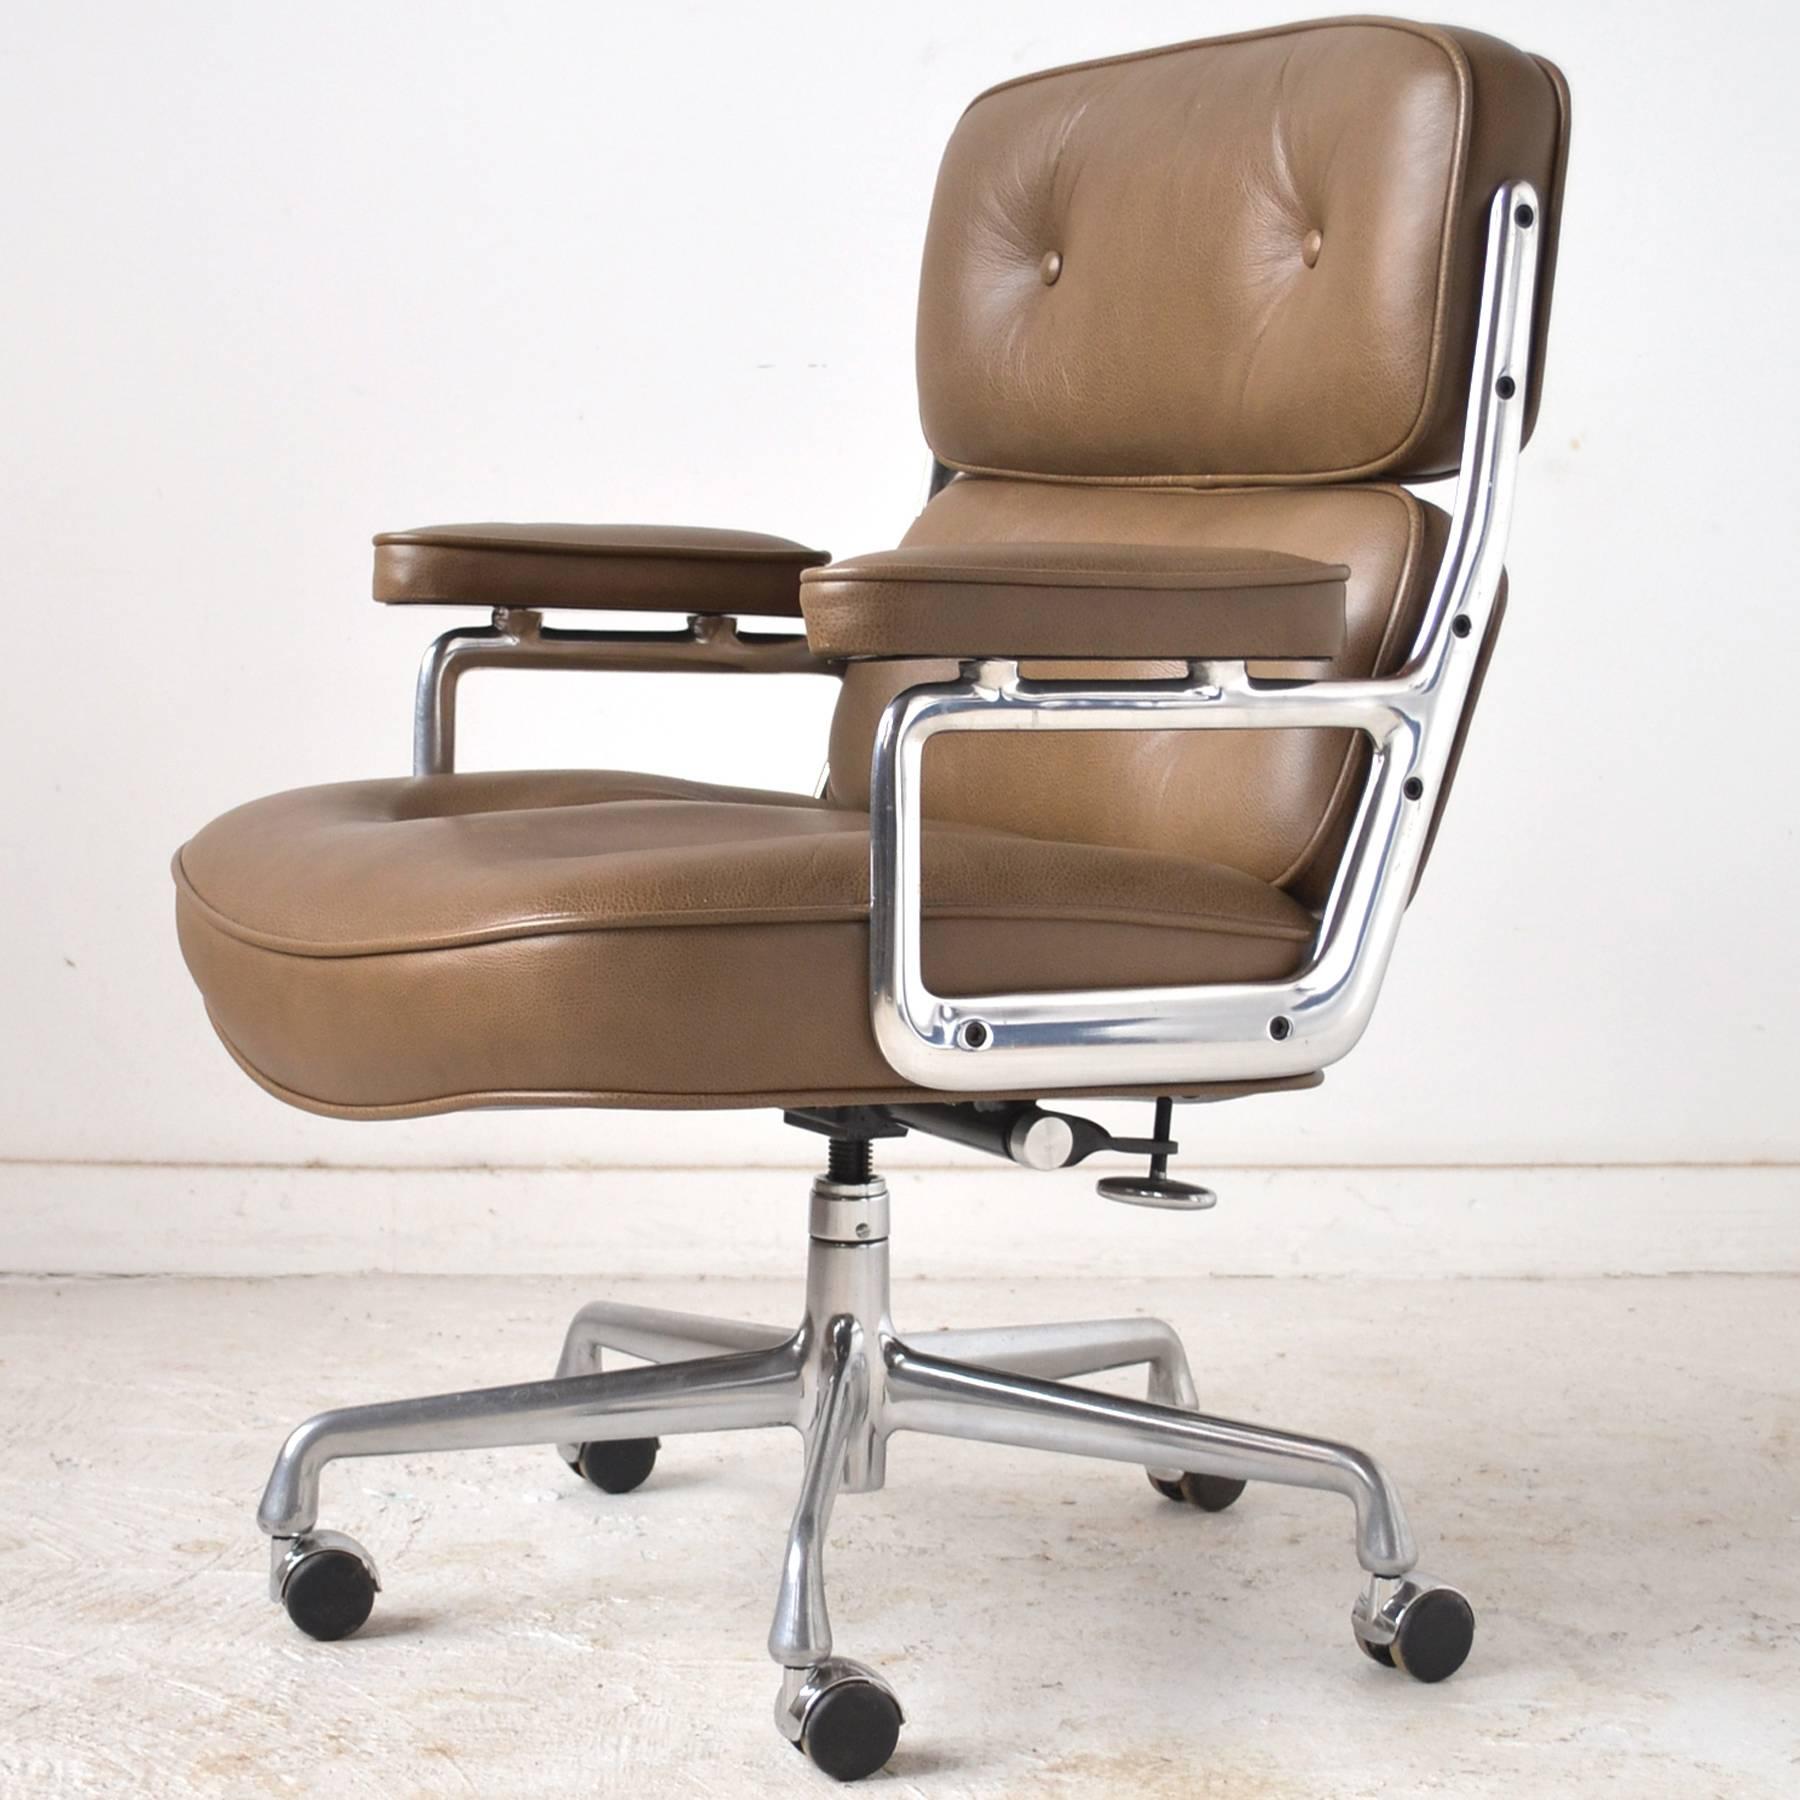 Originally designed for the Time-Life building in 1960, this chair shares qualities with other Eames designs. The generous proportions and deep luxurious cushions offer the sitter great comfort and the cast aluminum frame is light and stylish.
The